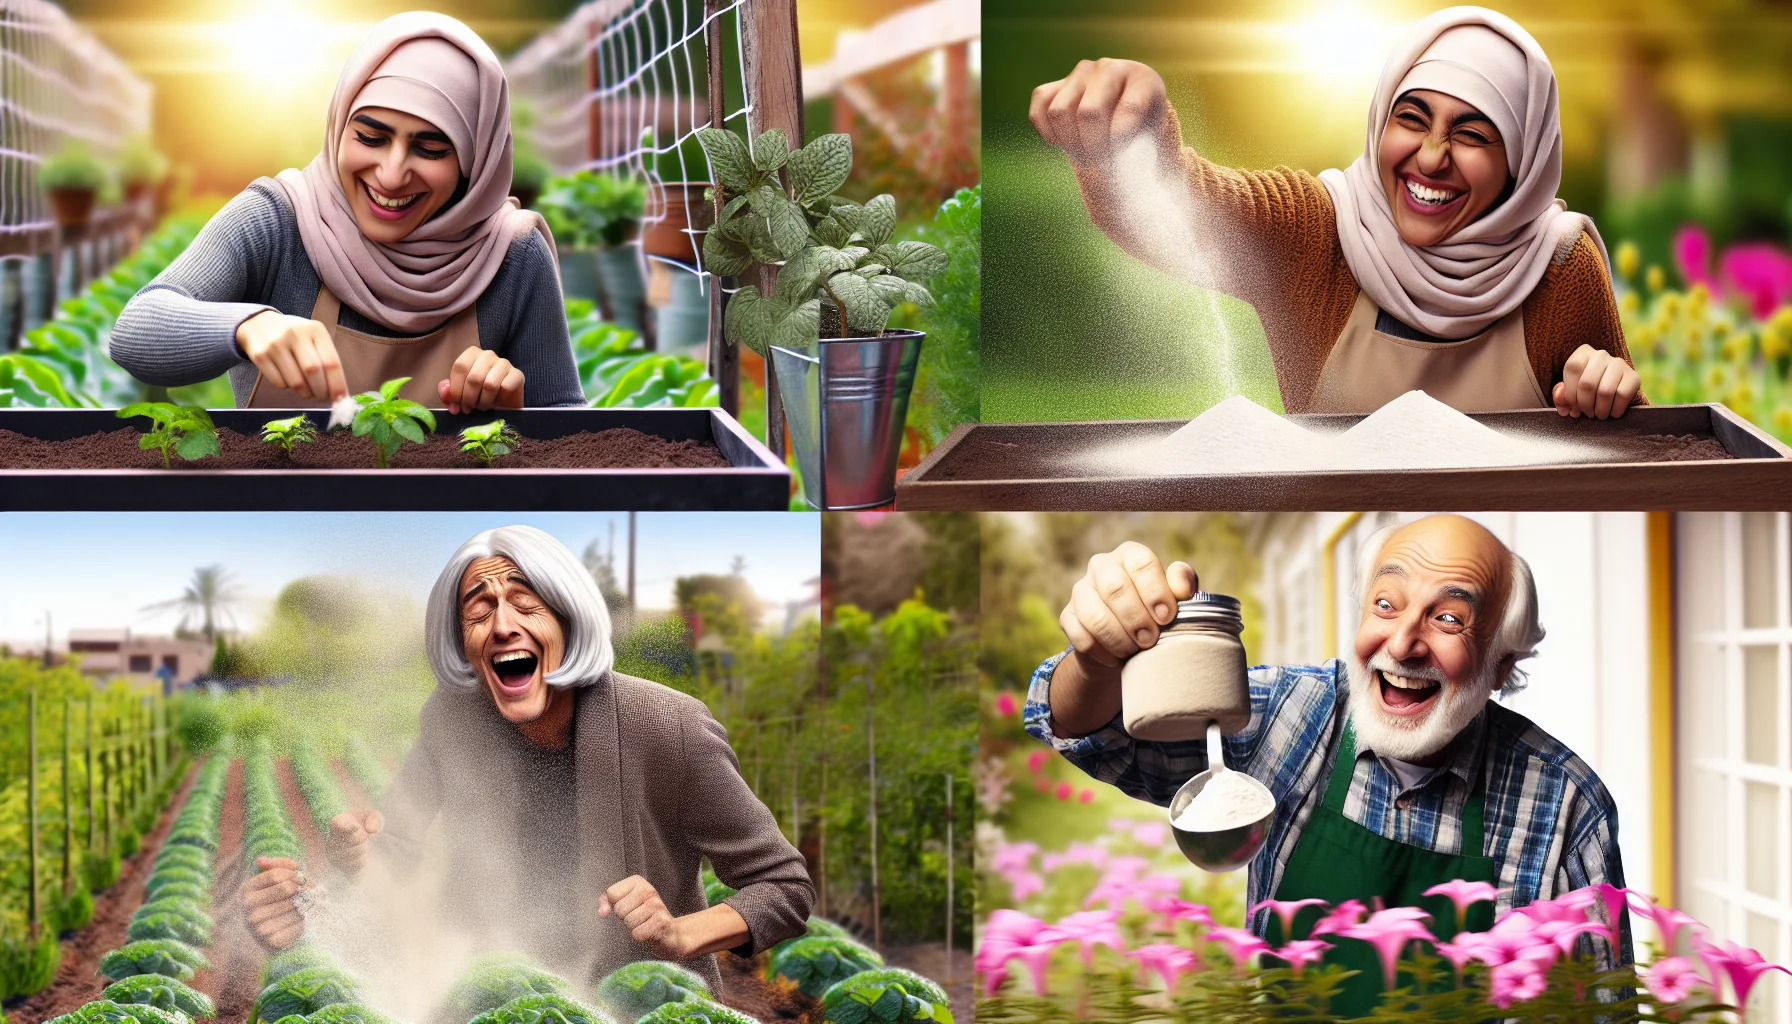 Generate a humorous and realistic image of several scenarios related to gardening using lime powder. In the first scene, a Middle-Eastern woman is laughing while sprinkling lime powder on her plants to enrich the soil productivity. In the second scene, a Hispanic man is amused as he uses lime powder to deter pests from his vegetable garden. In the third scene, an elderly Caucasian man makes a funny face, pretending the lime powder is a magic dust that encourages his flower plants to bloom rapidly. This lighthearted image should inspire people to enjoy the gardening process.